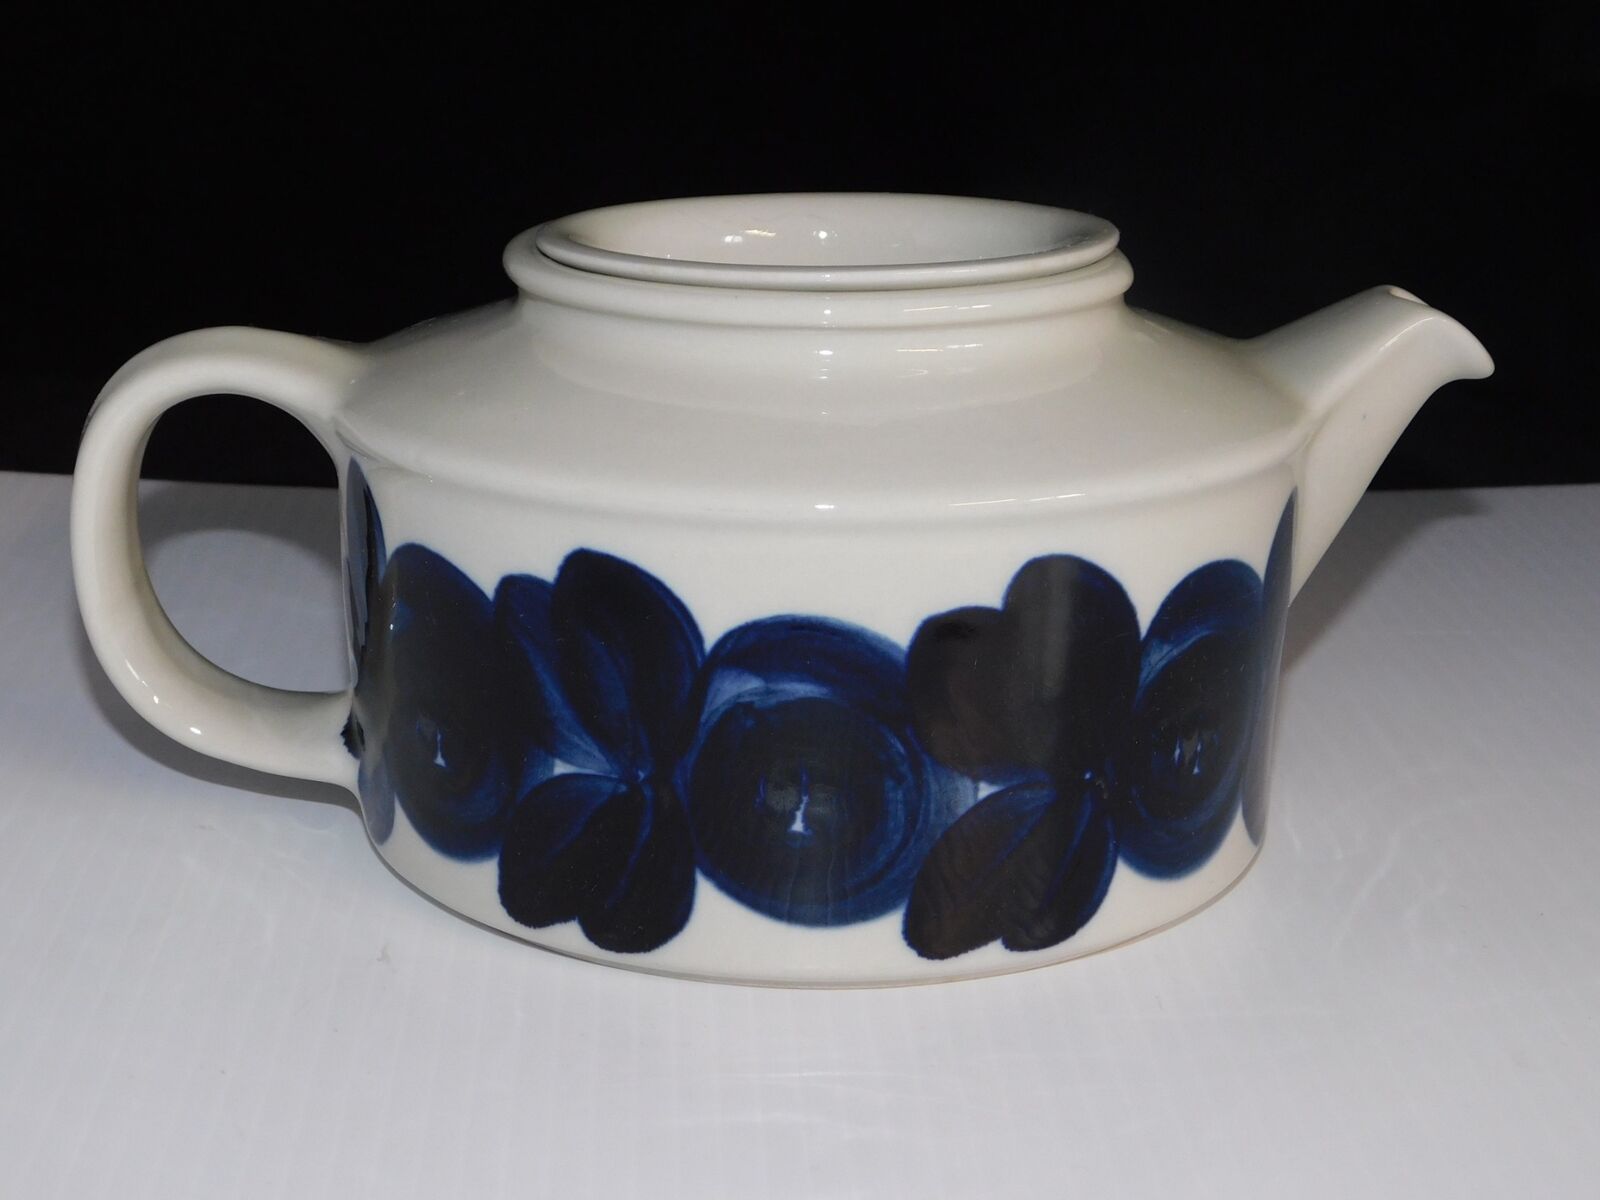 ARABIA FINLAND ULLA PROCOPE BLUE ANEMONE TEAPOT WITH INFUSER NO LID